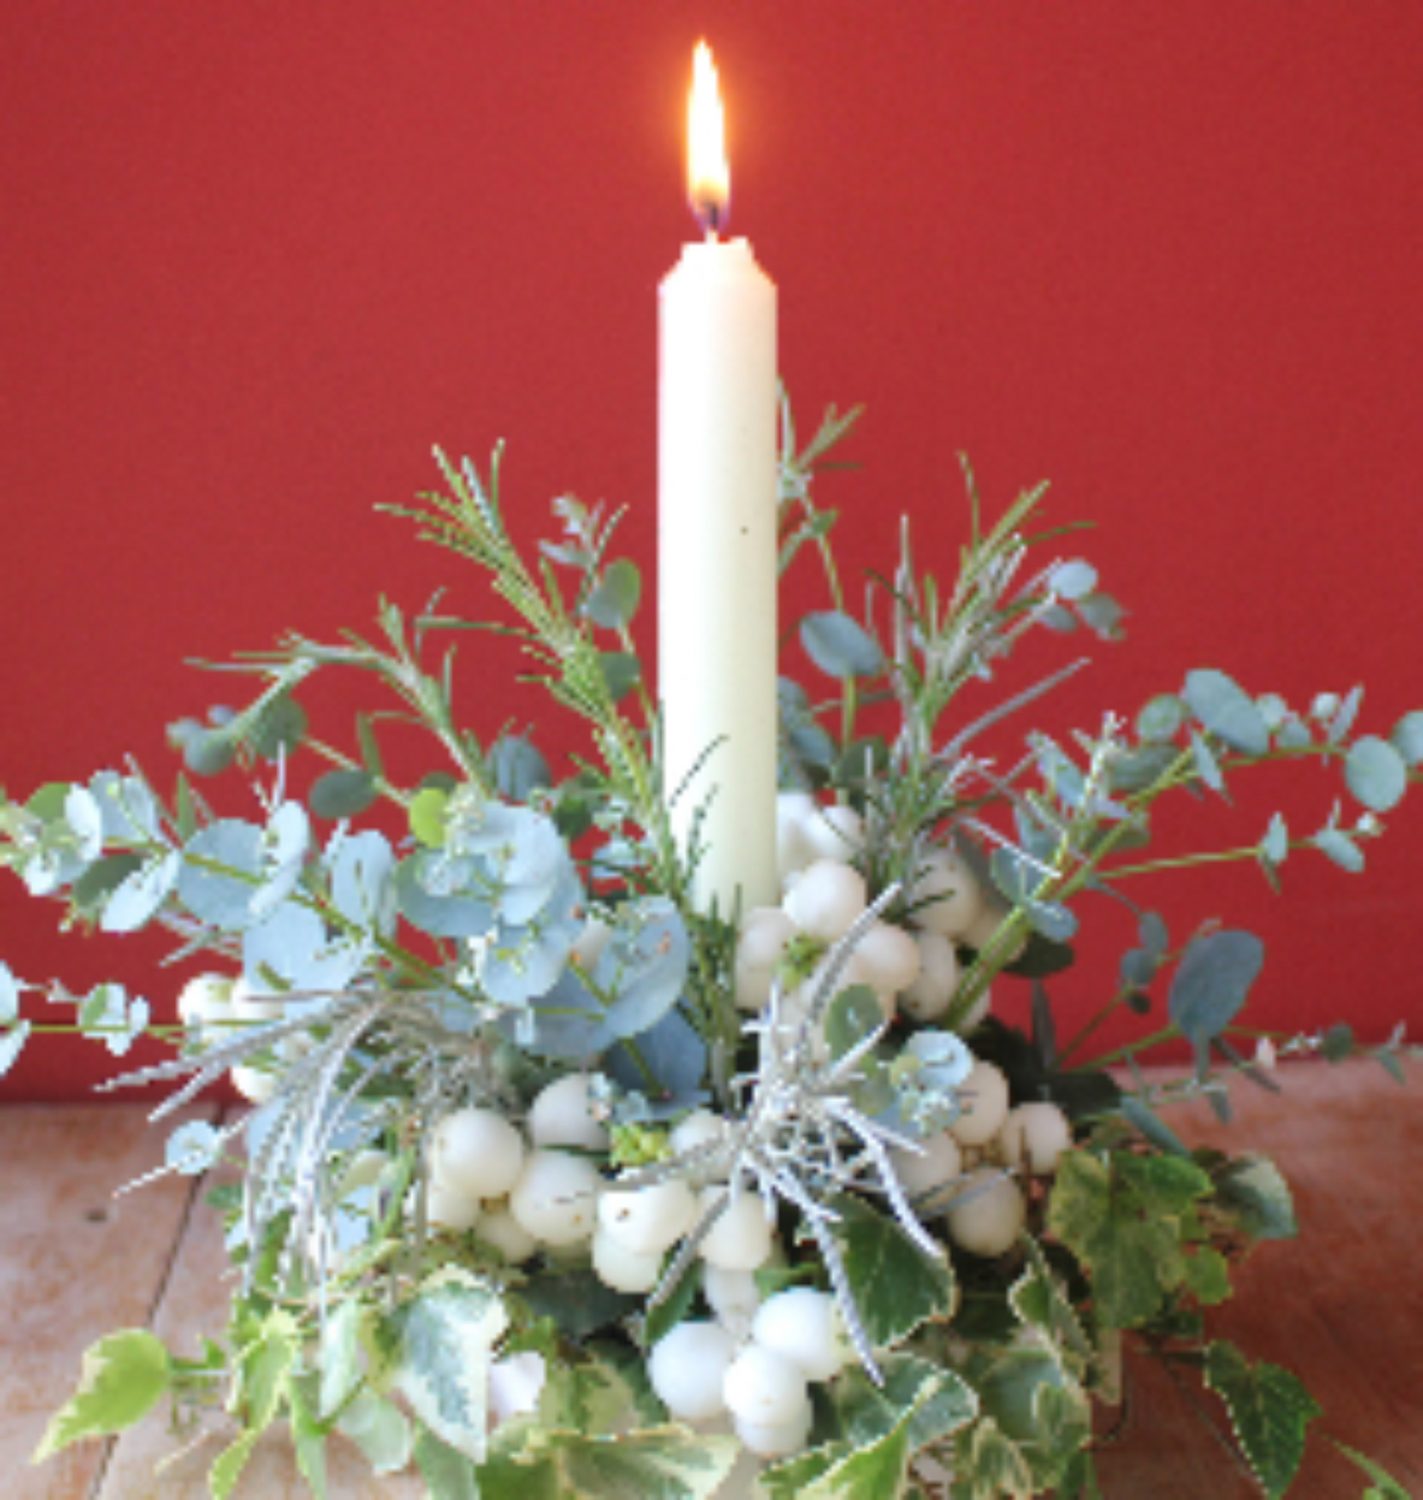 5. Use to decorate a mantlepiece or table, topping up with water to keep fresh.